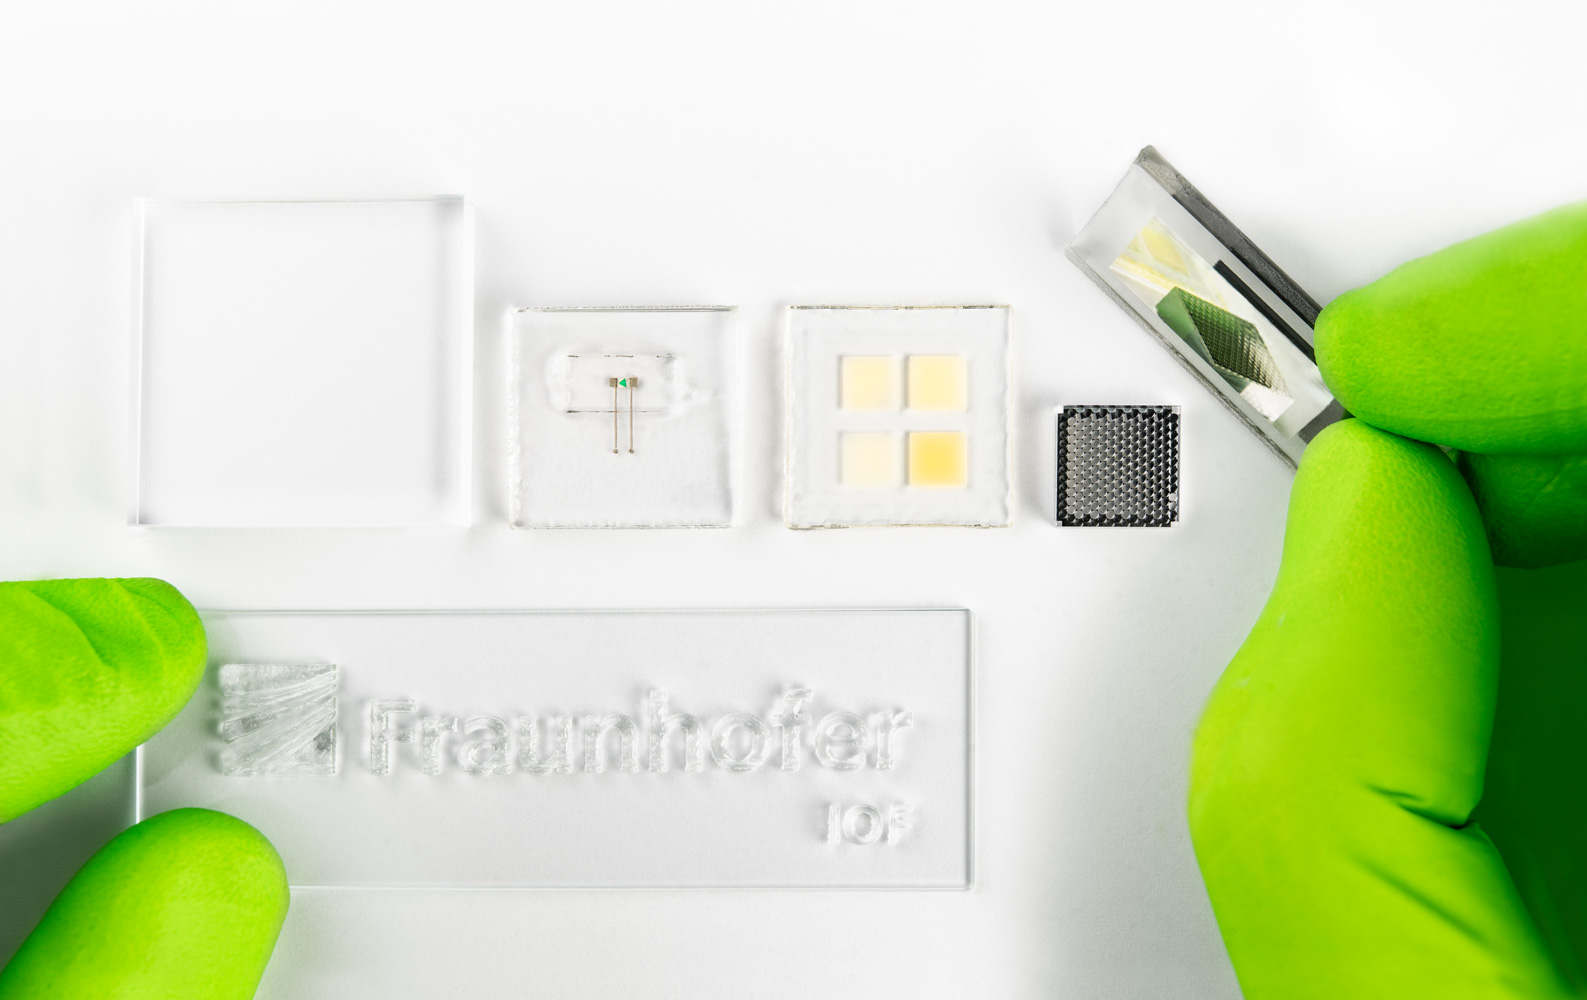 Integrated functionalities (LEDs, baffles, printed silver mirrors) in inkjet-printed molded parts made of Ormocomp®.